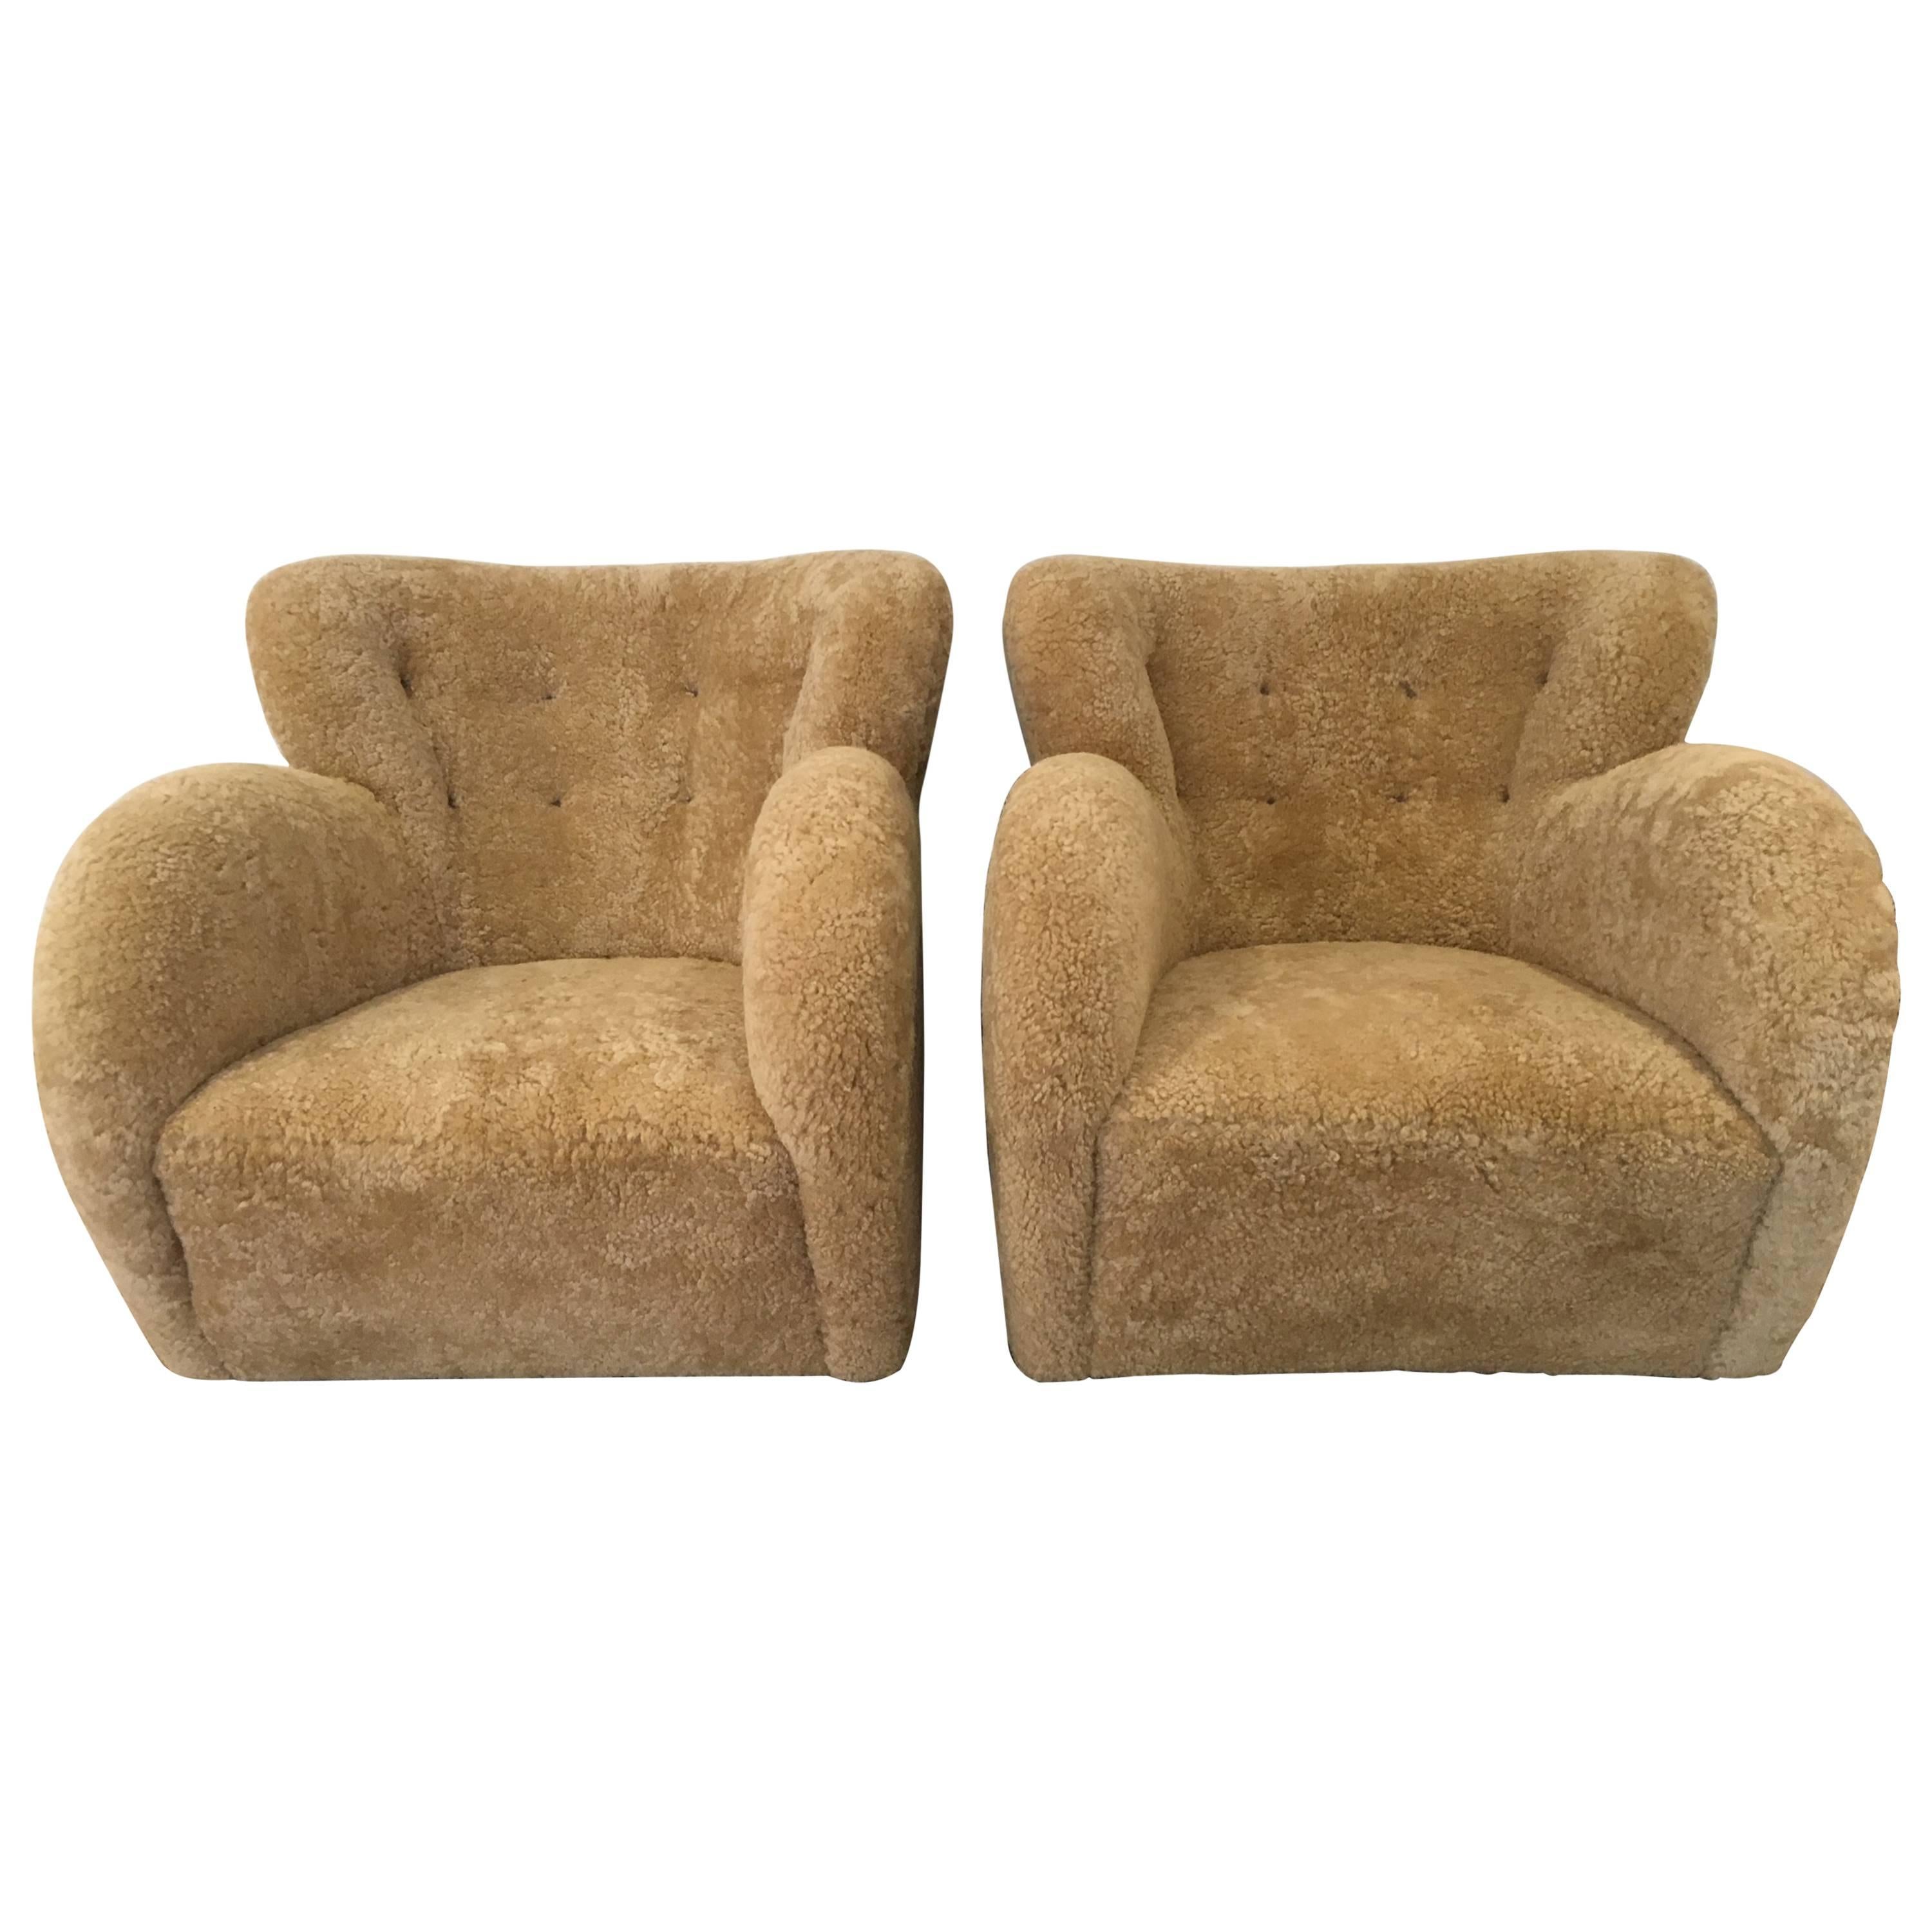 Pair of Flemming Lassen Attributed Lounge Chairs, 1940s